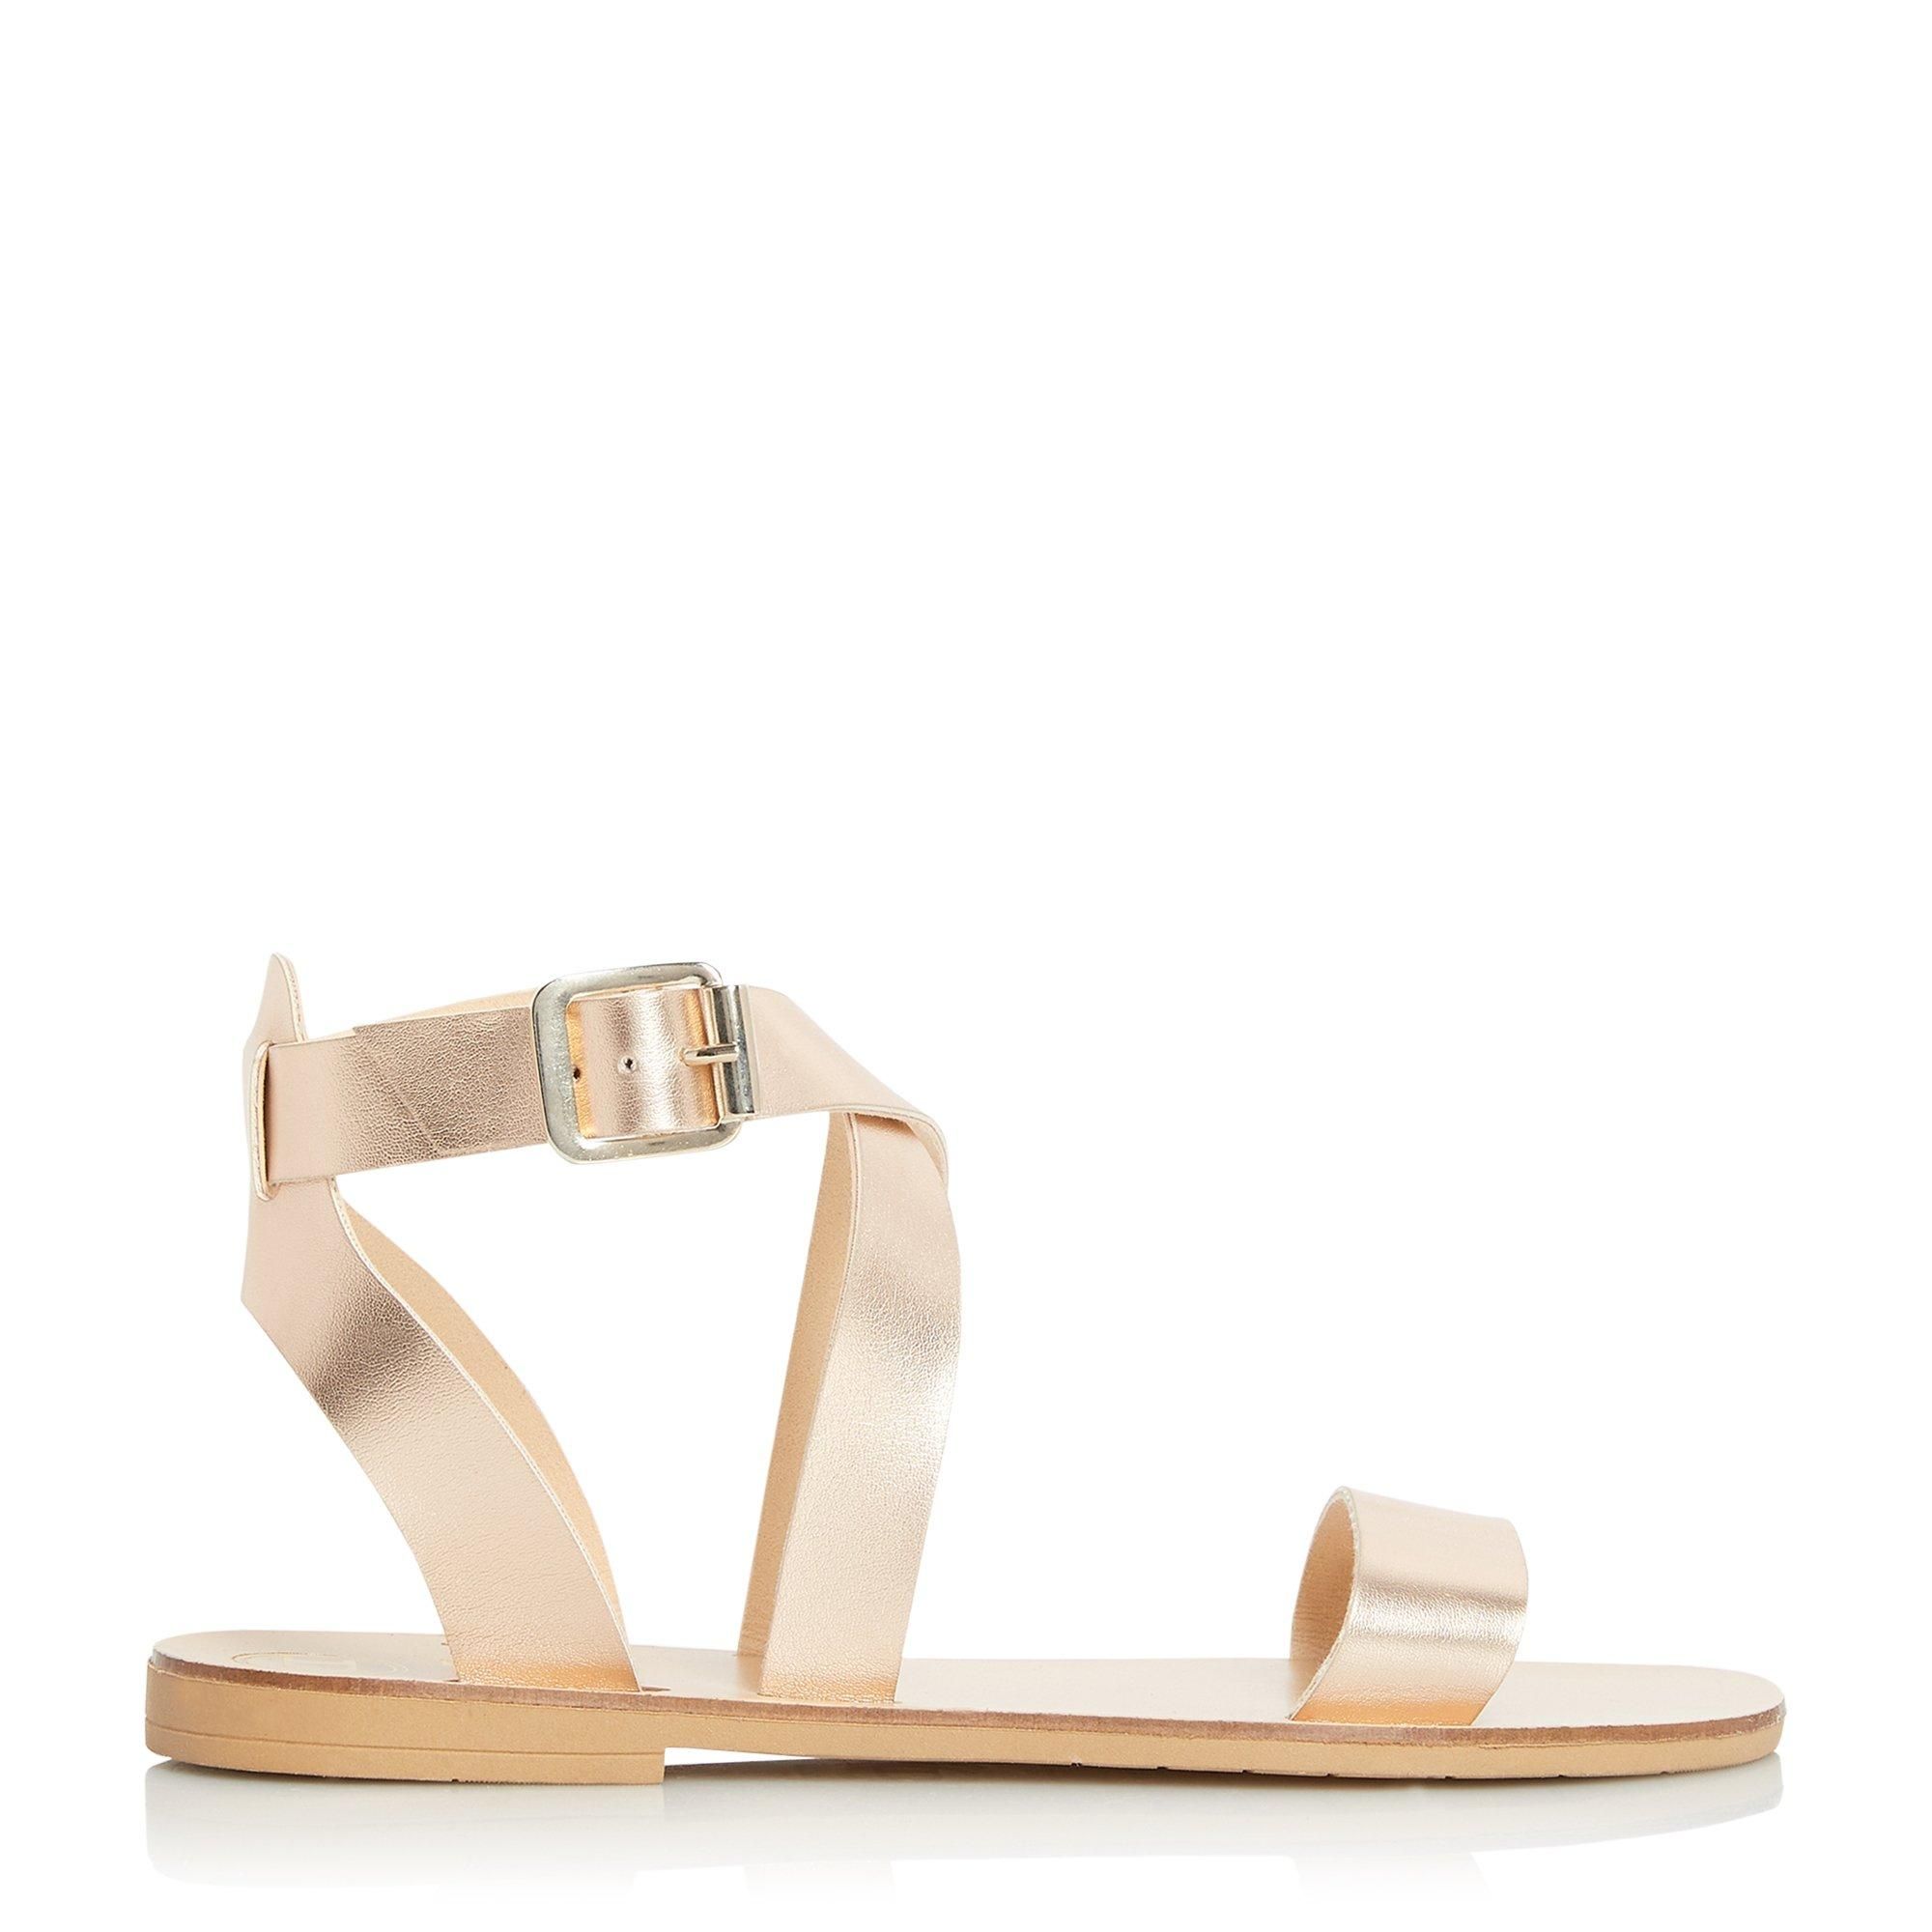 From Dune London, the Lottie sandal is a versatile summer style option. Made from leather, it showcases a multi strap design with an open toe. Complete with an asymmetric strap and secure buckle fastening.